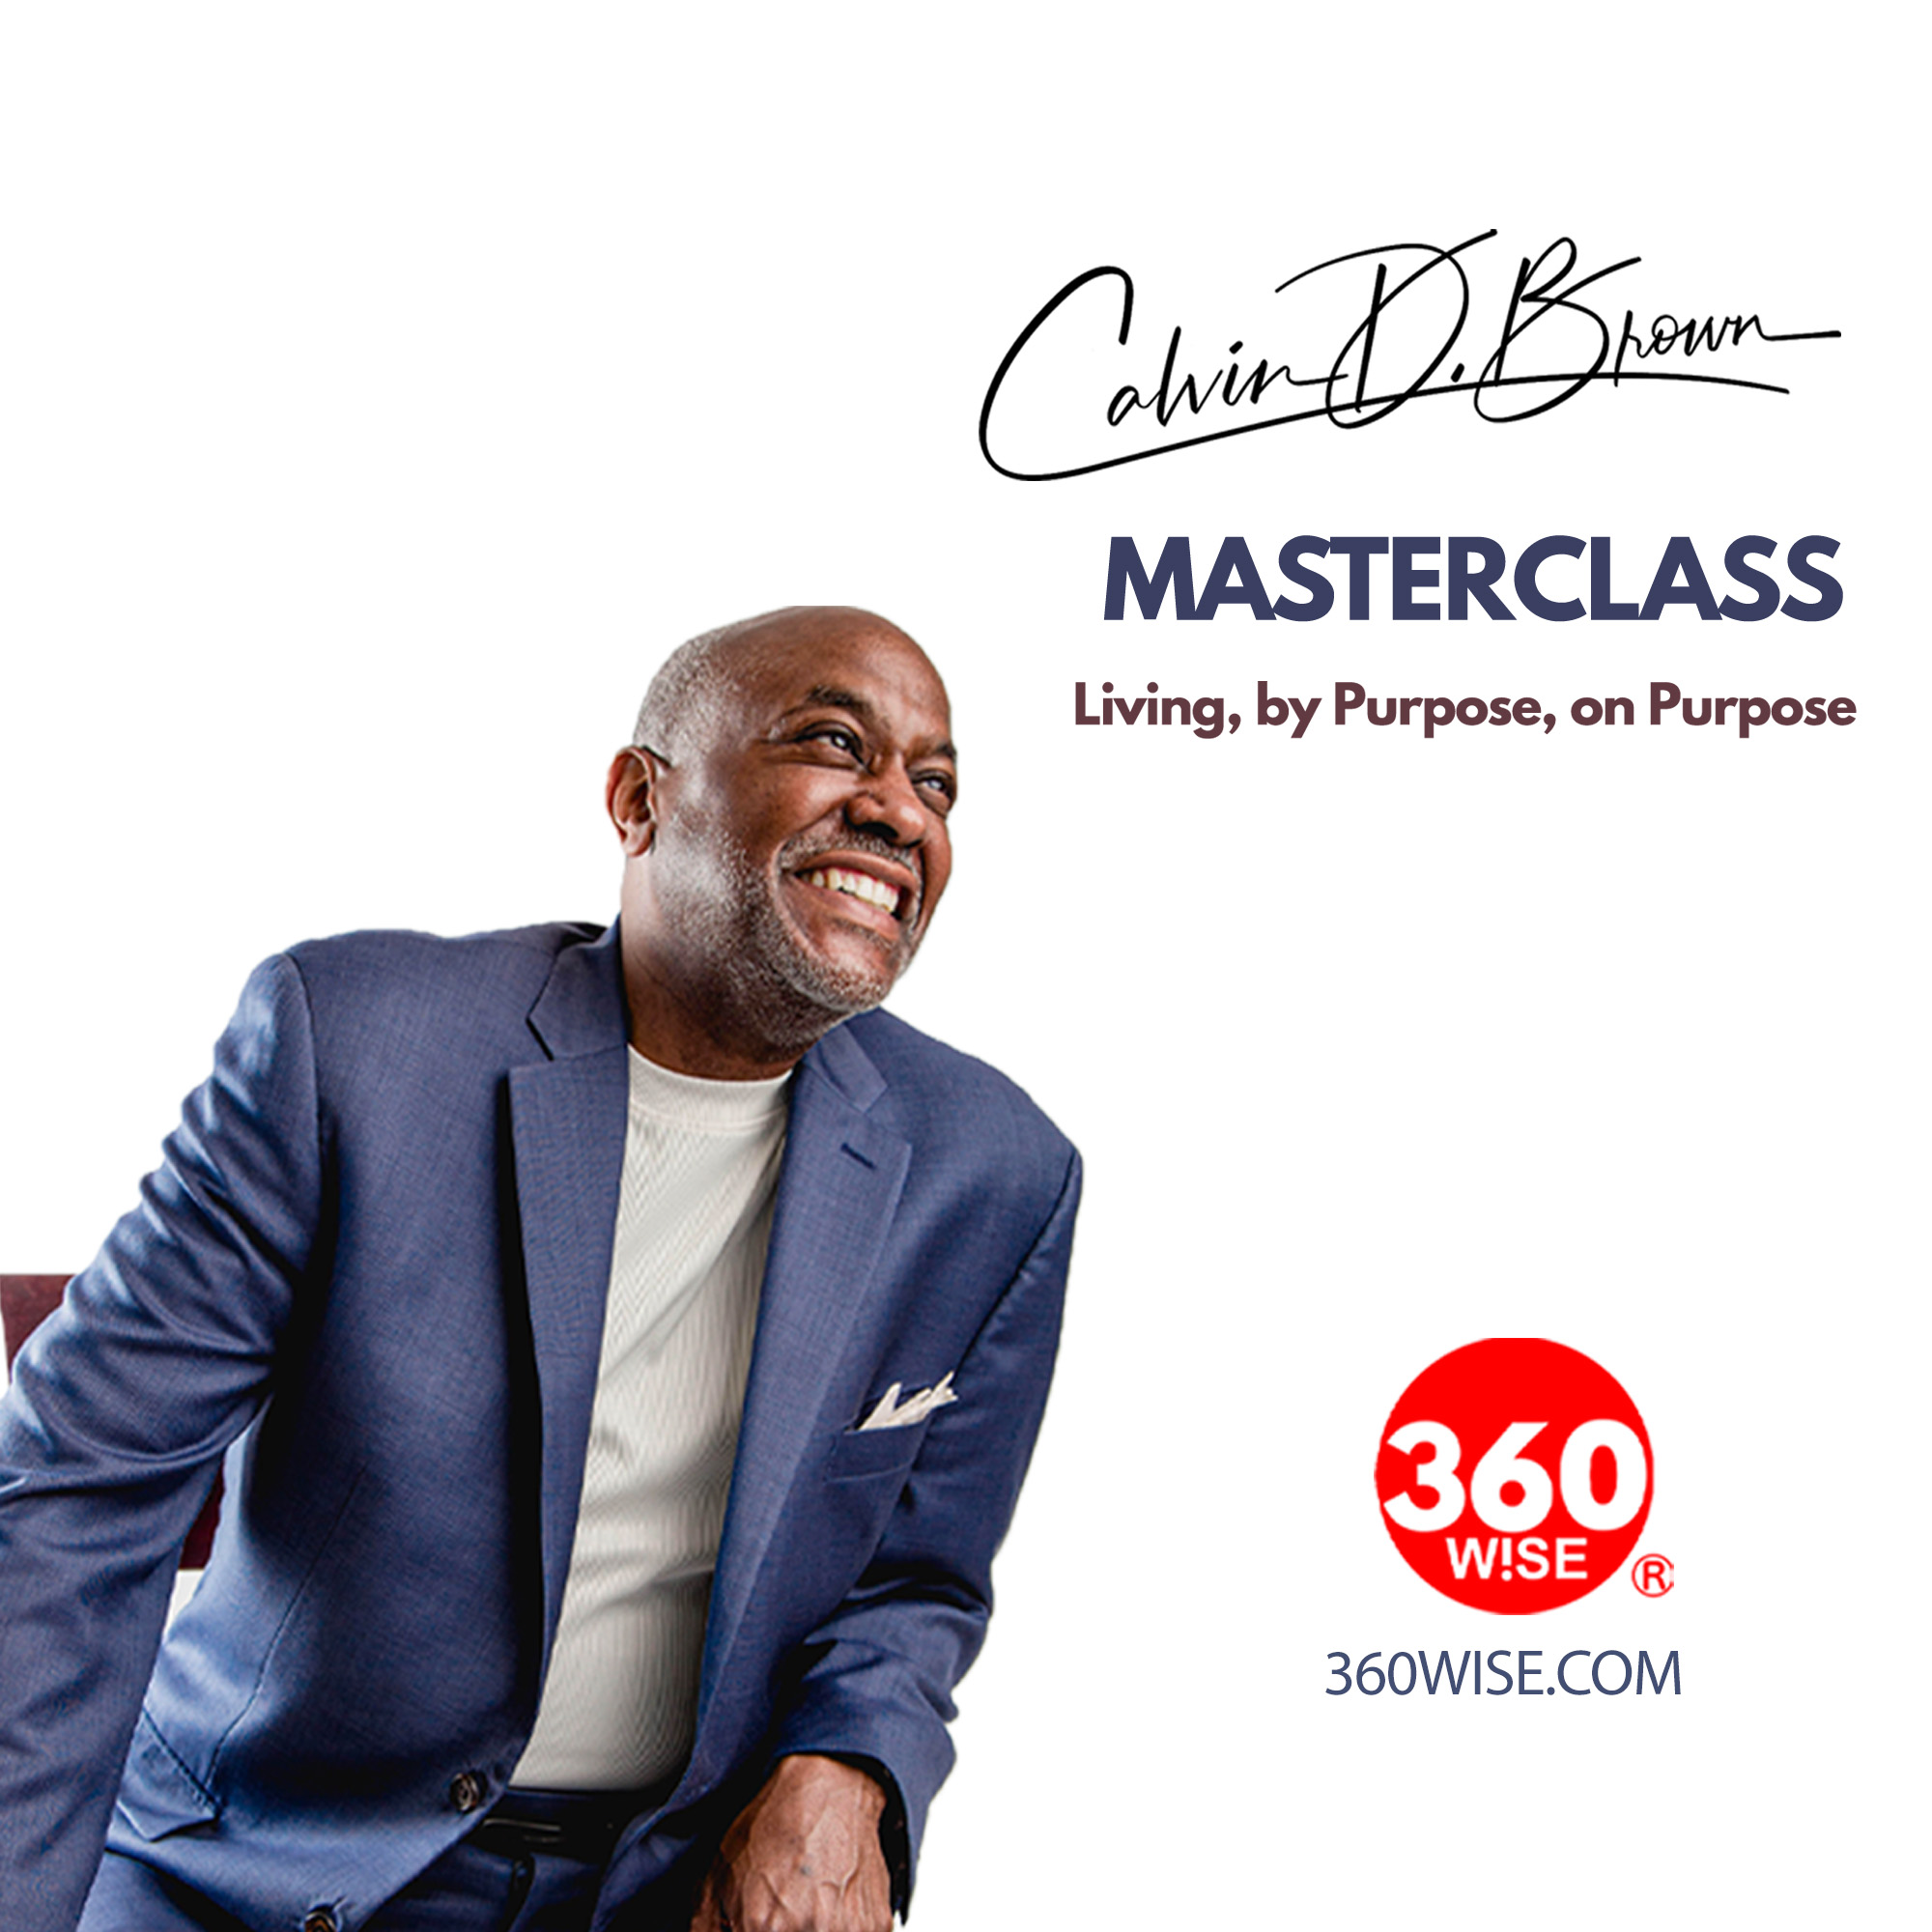 Successful Fortune 100 Executive Coach Calvin D. Brown Launches Free Master Class Exclusively with 360Wise Media